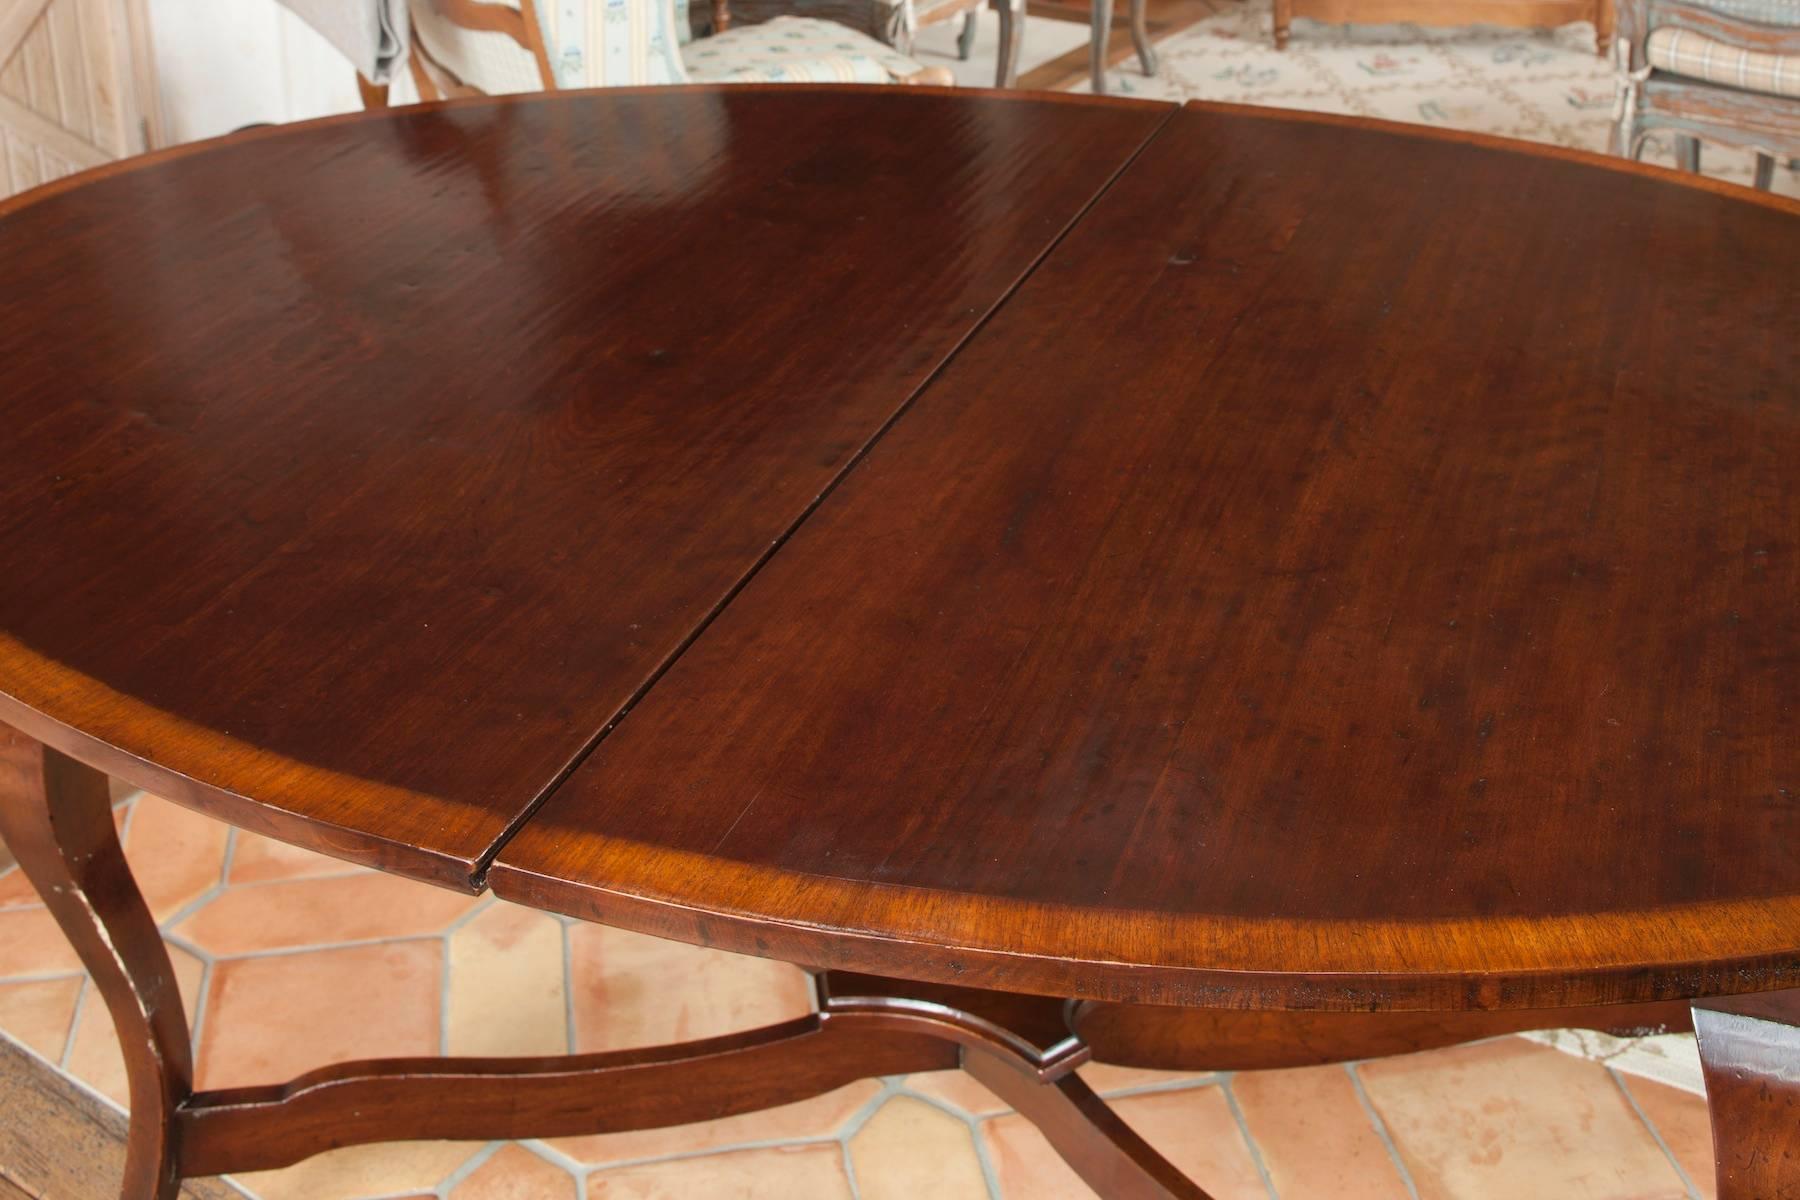 Supplied by David Easton for a private residence. Hand-carved table with cherry finish mildly distressed for an antique effect. With contrast banding along edge and raised on cabriole legs joined by a gracefully arching stretcher. Opens to one